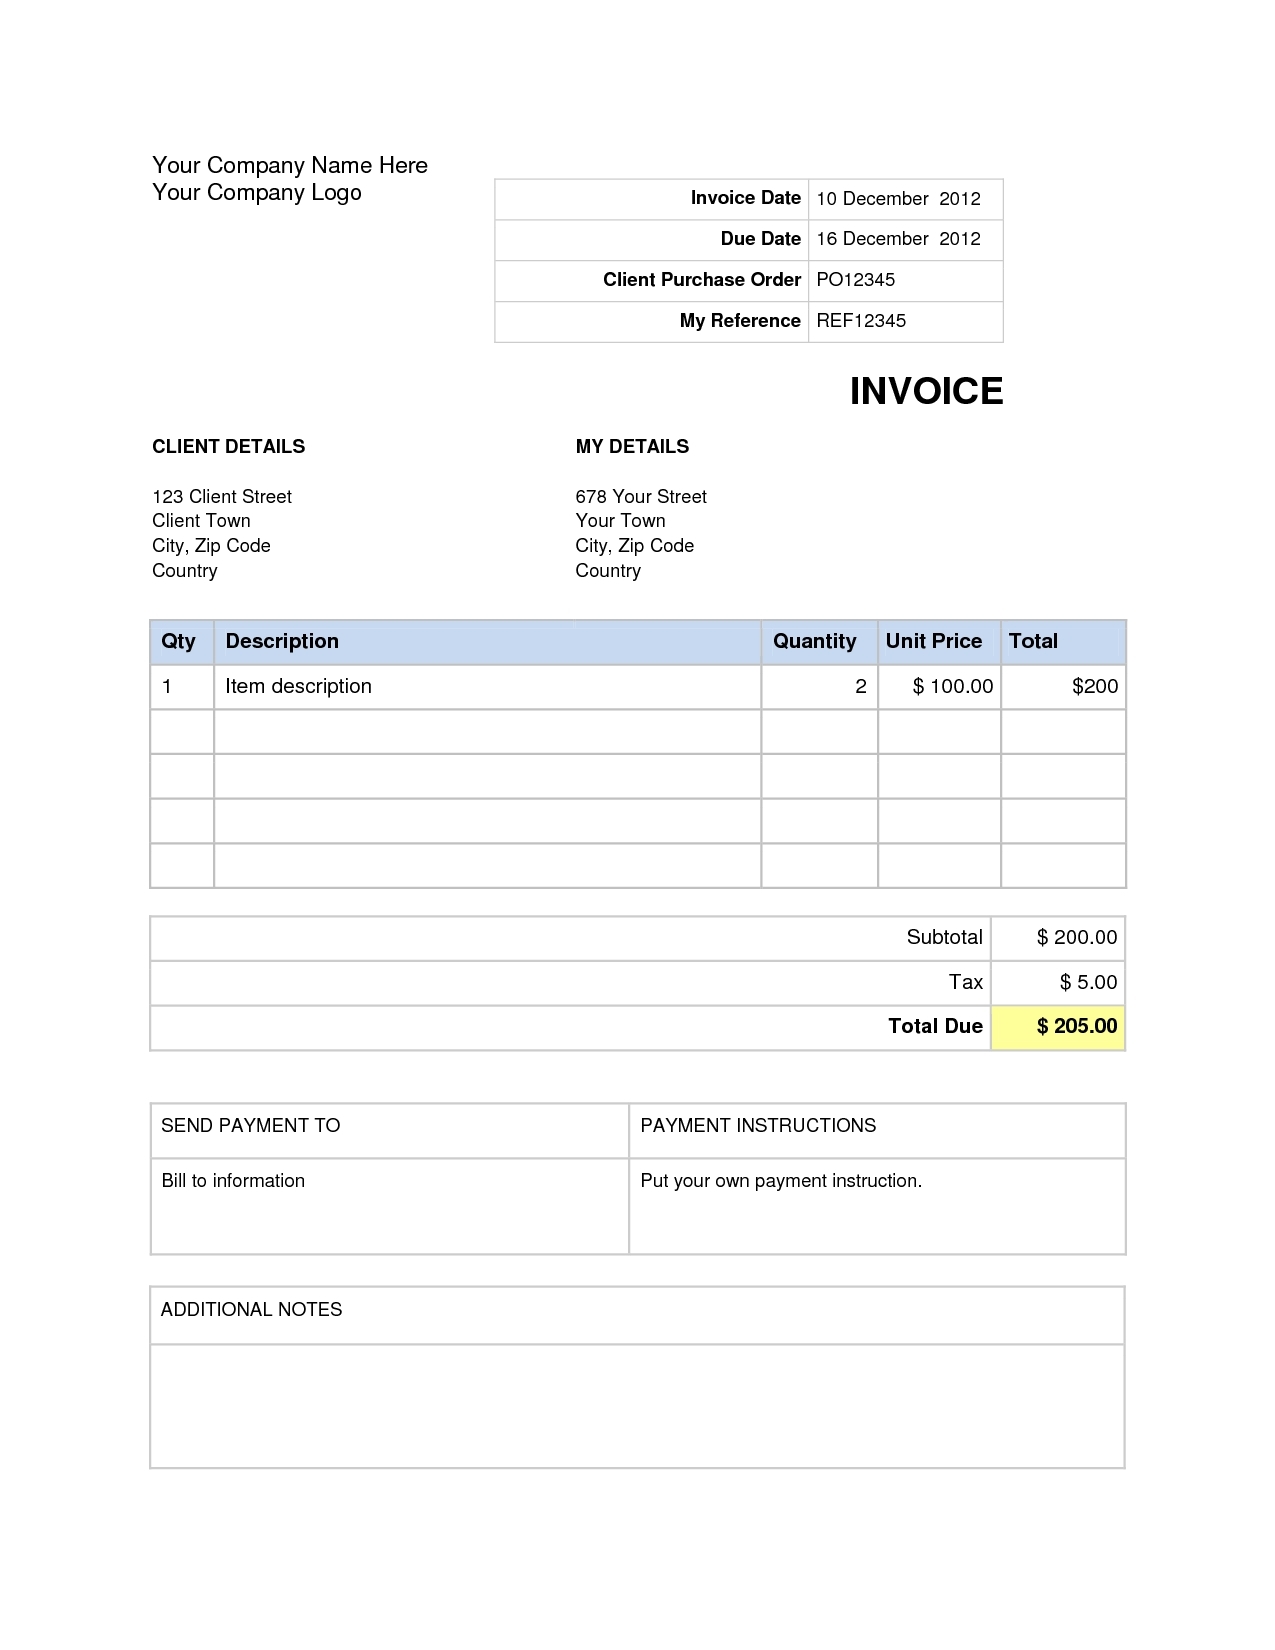 microsoft-word-invoice-template-invoices-office-regarding-templates-in